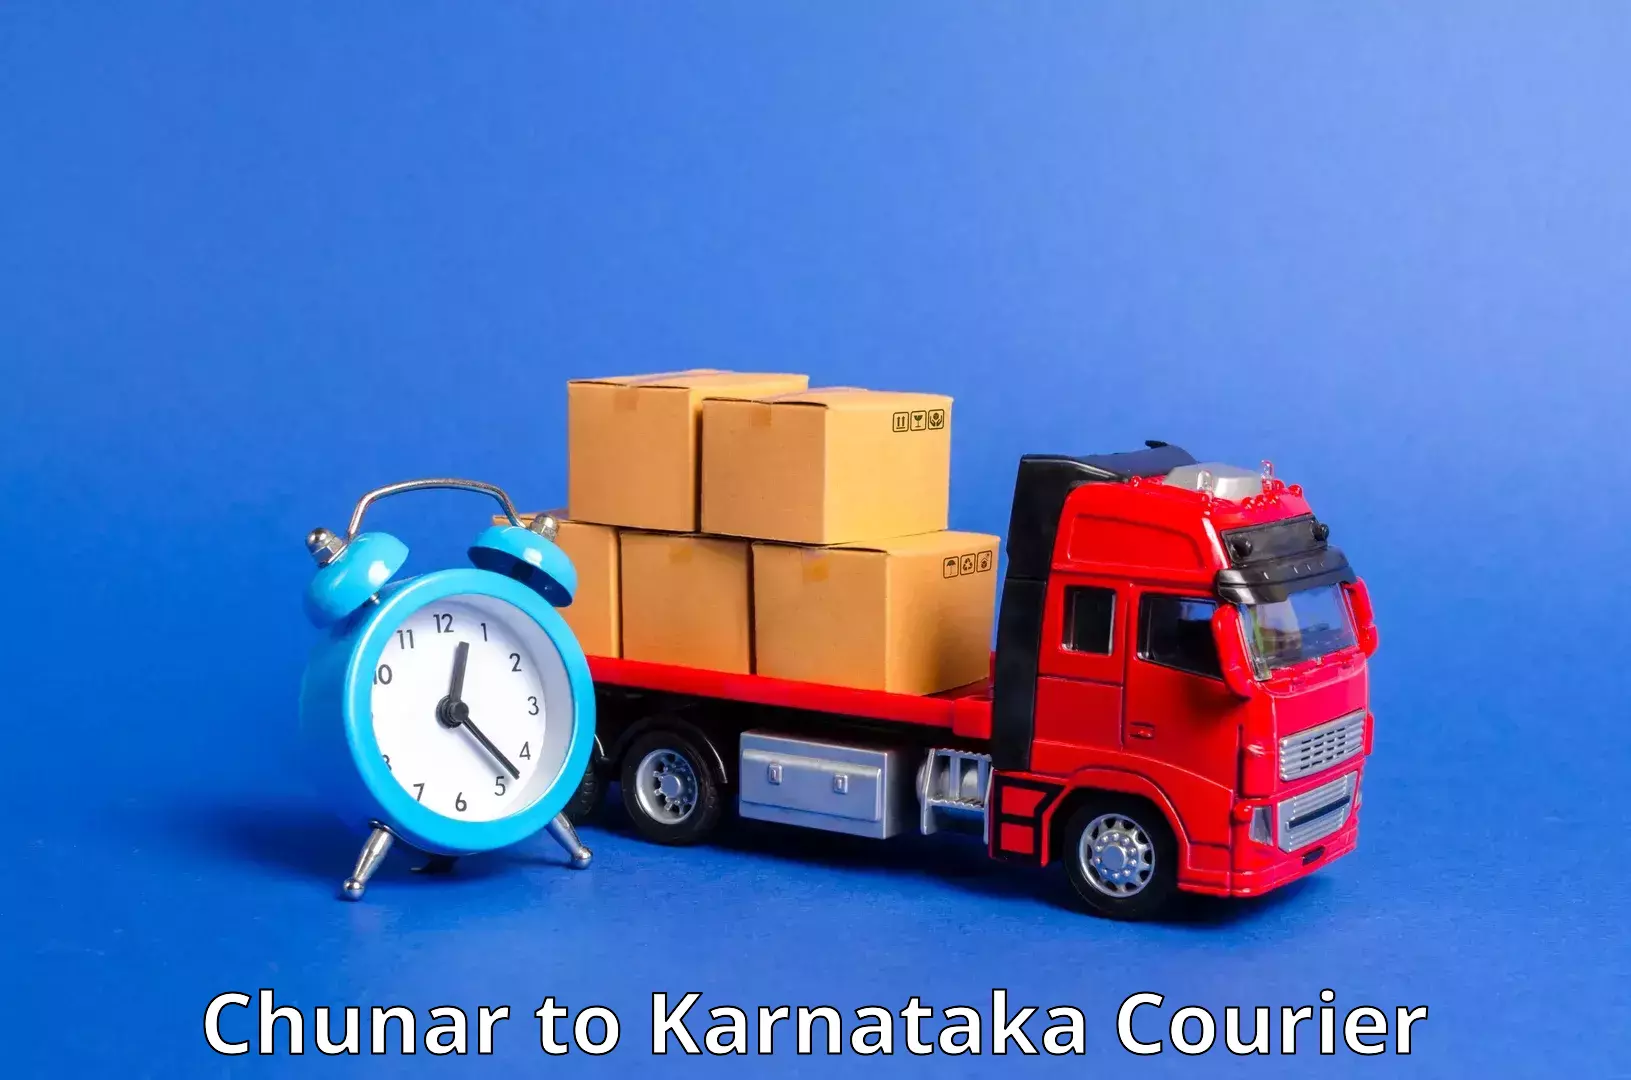 Premium delivery services Chunar to Manipal